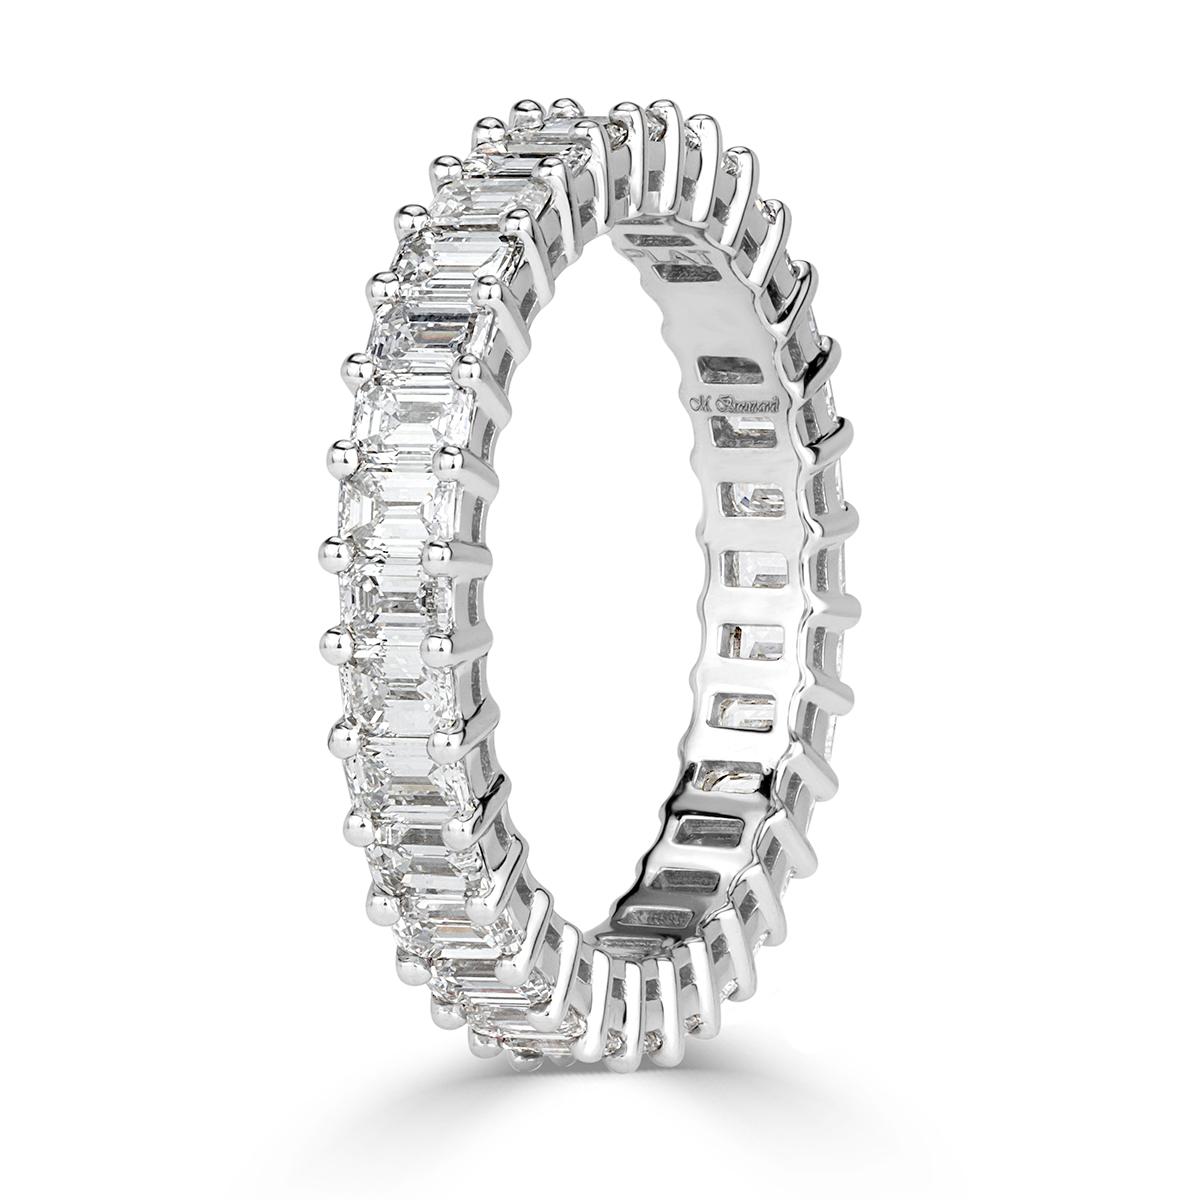 Designed in high polish platinum, this gorgeous diamond eternity band showcases 2.70ct of emerald cut diamonds graded at E-F, VVS2-VS1 in clarity. They are set in a 